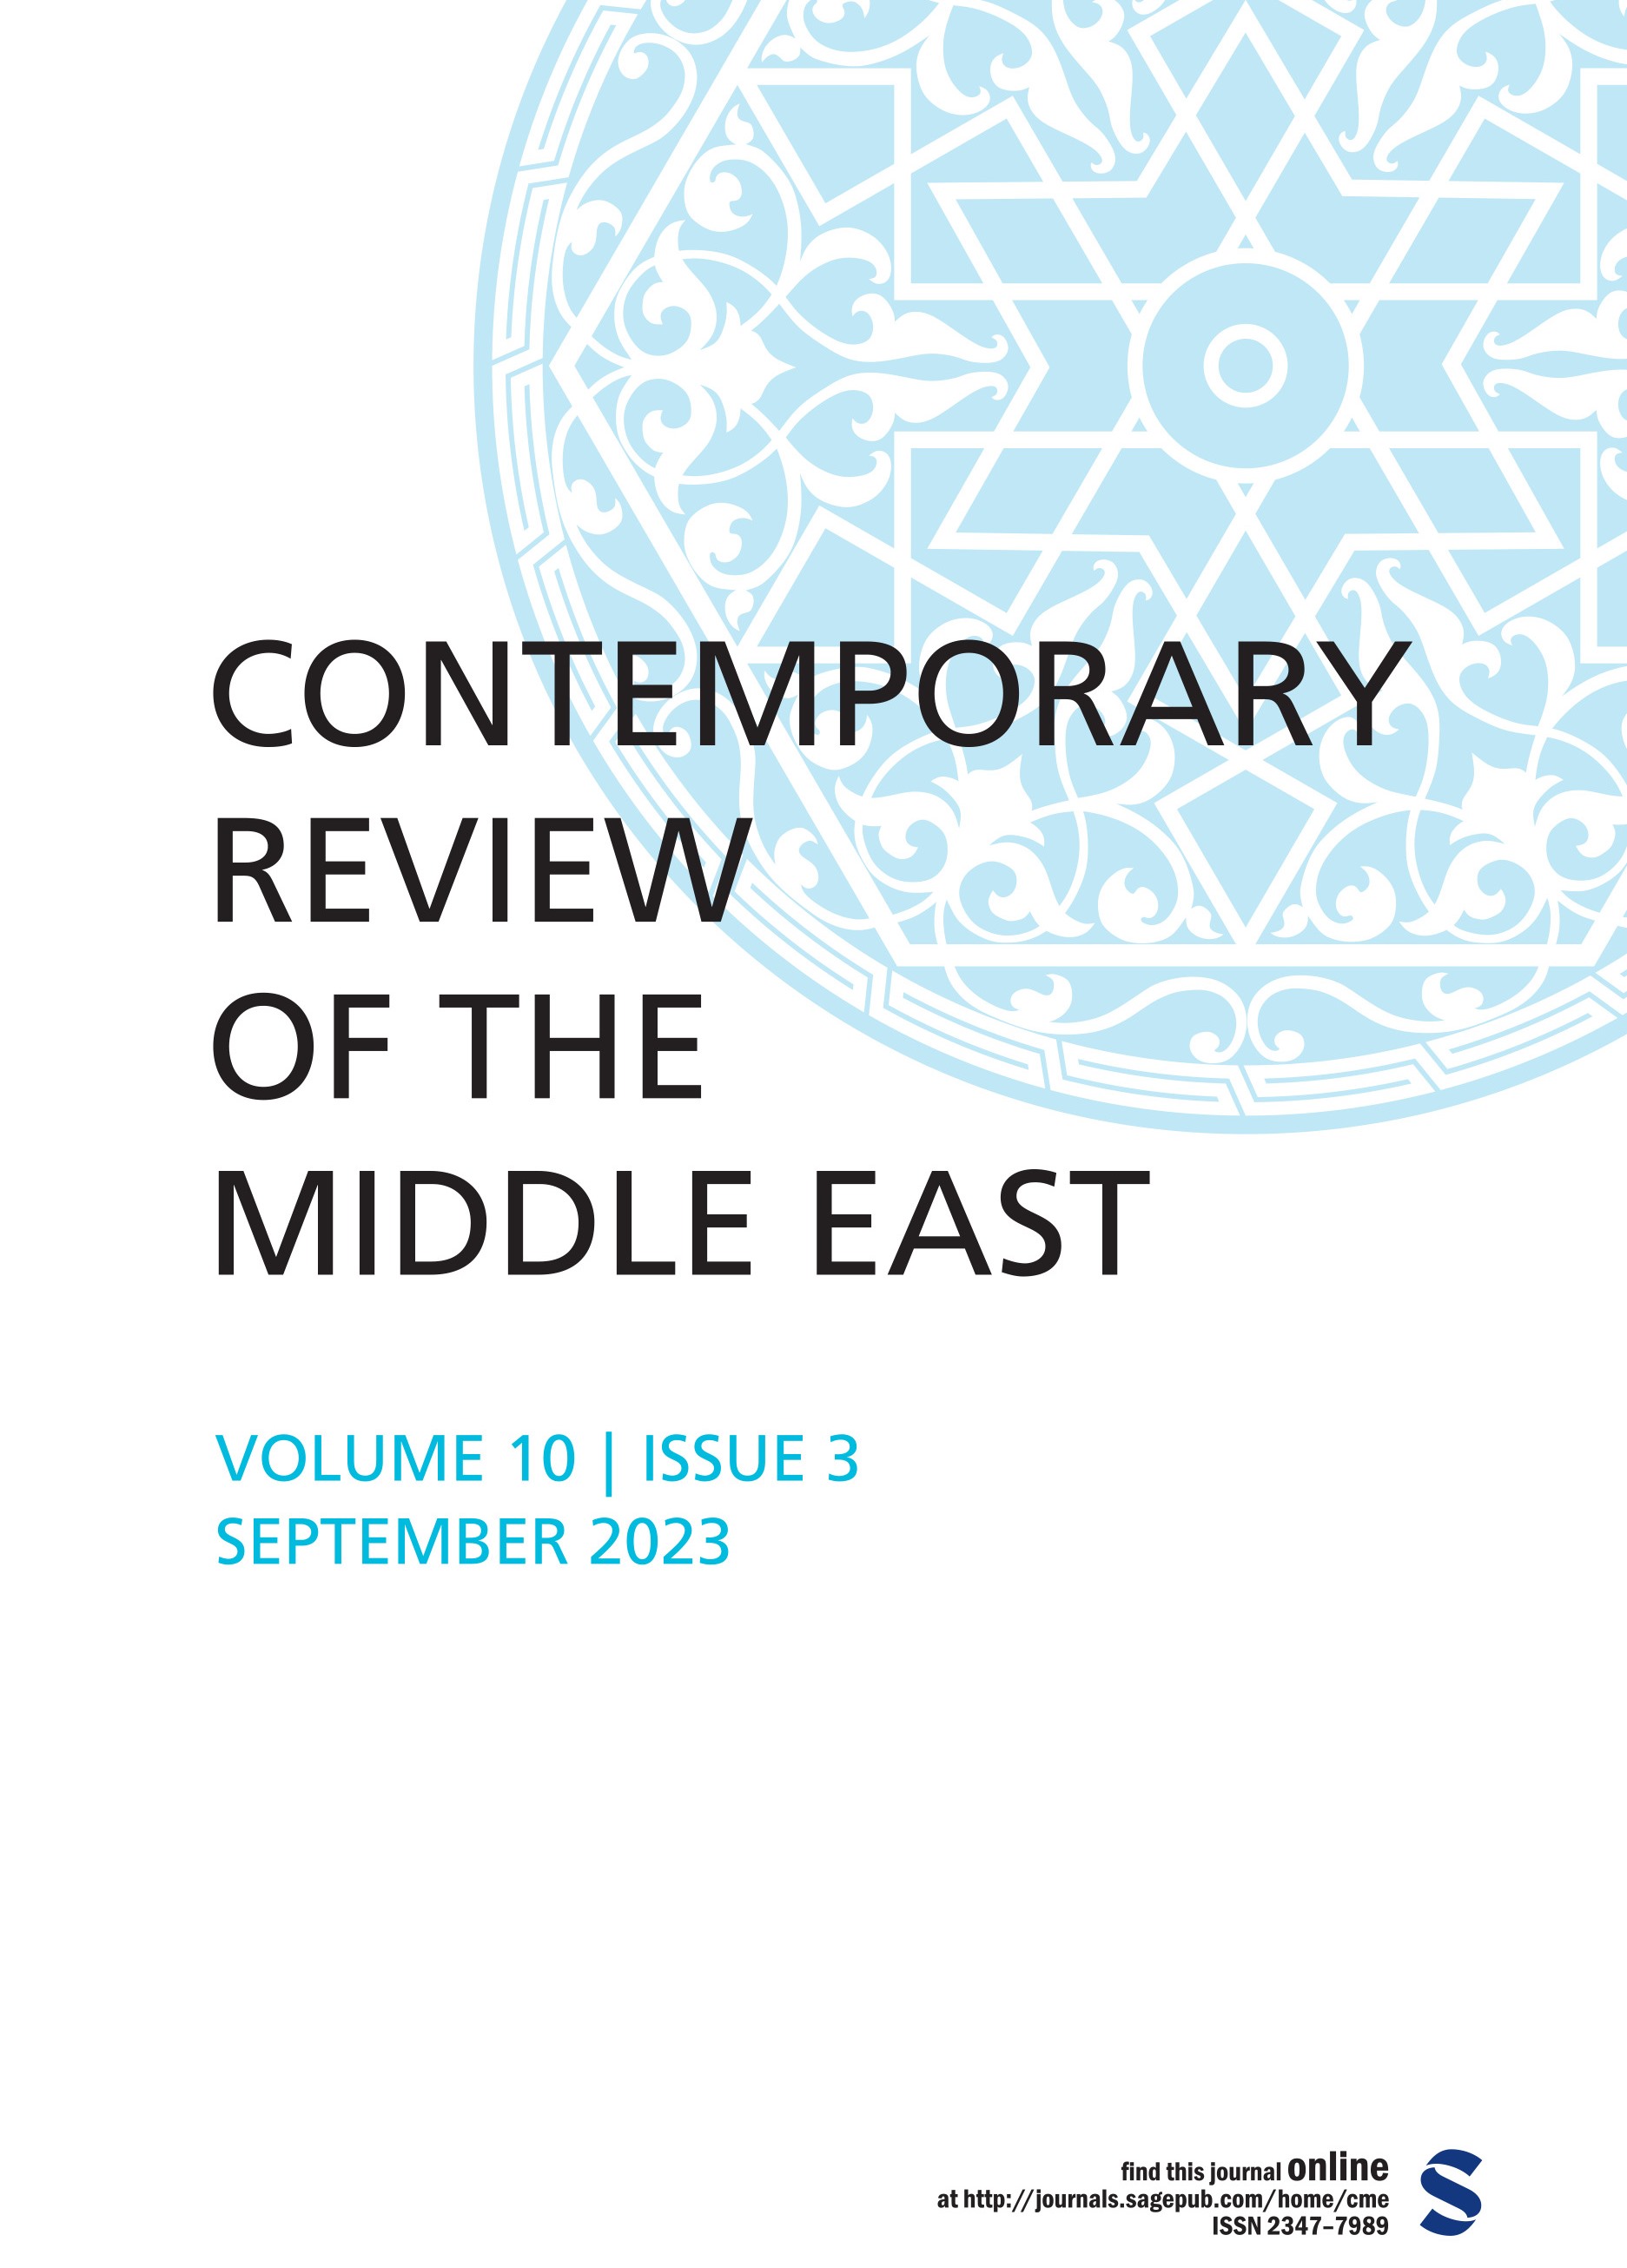 Contemporary Review of the Middle East Volume 10 Issue 3, September 2023: Dateline MEI